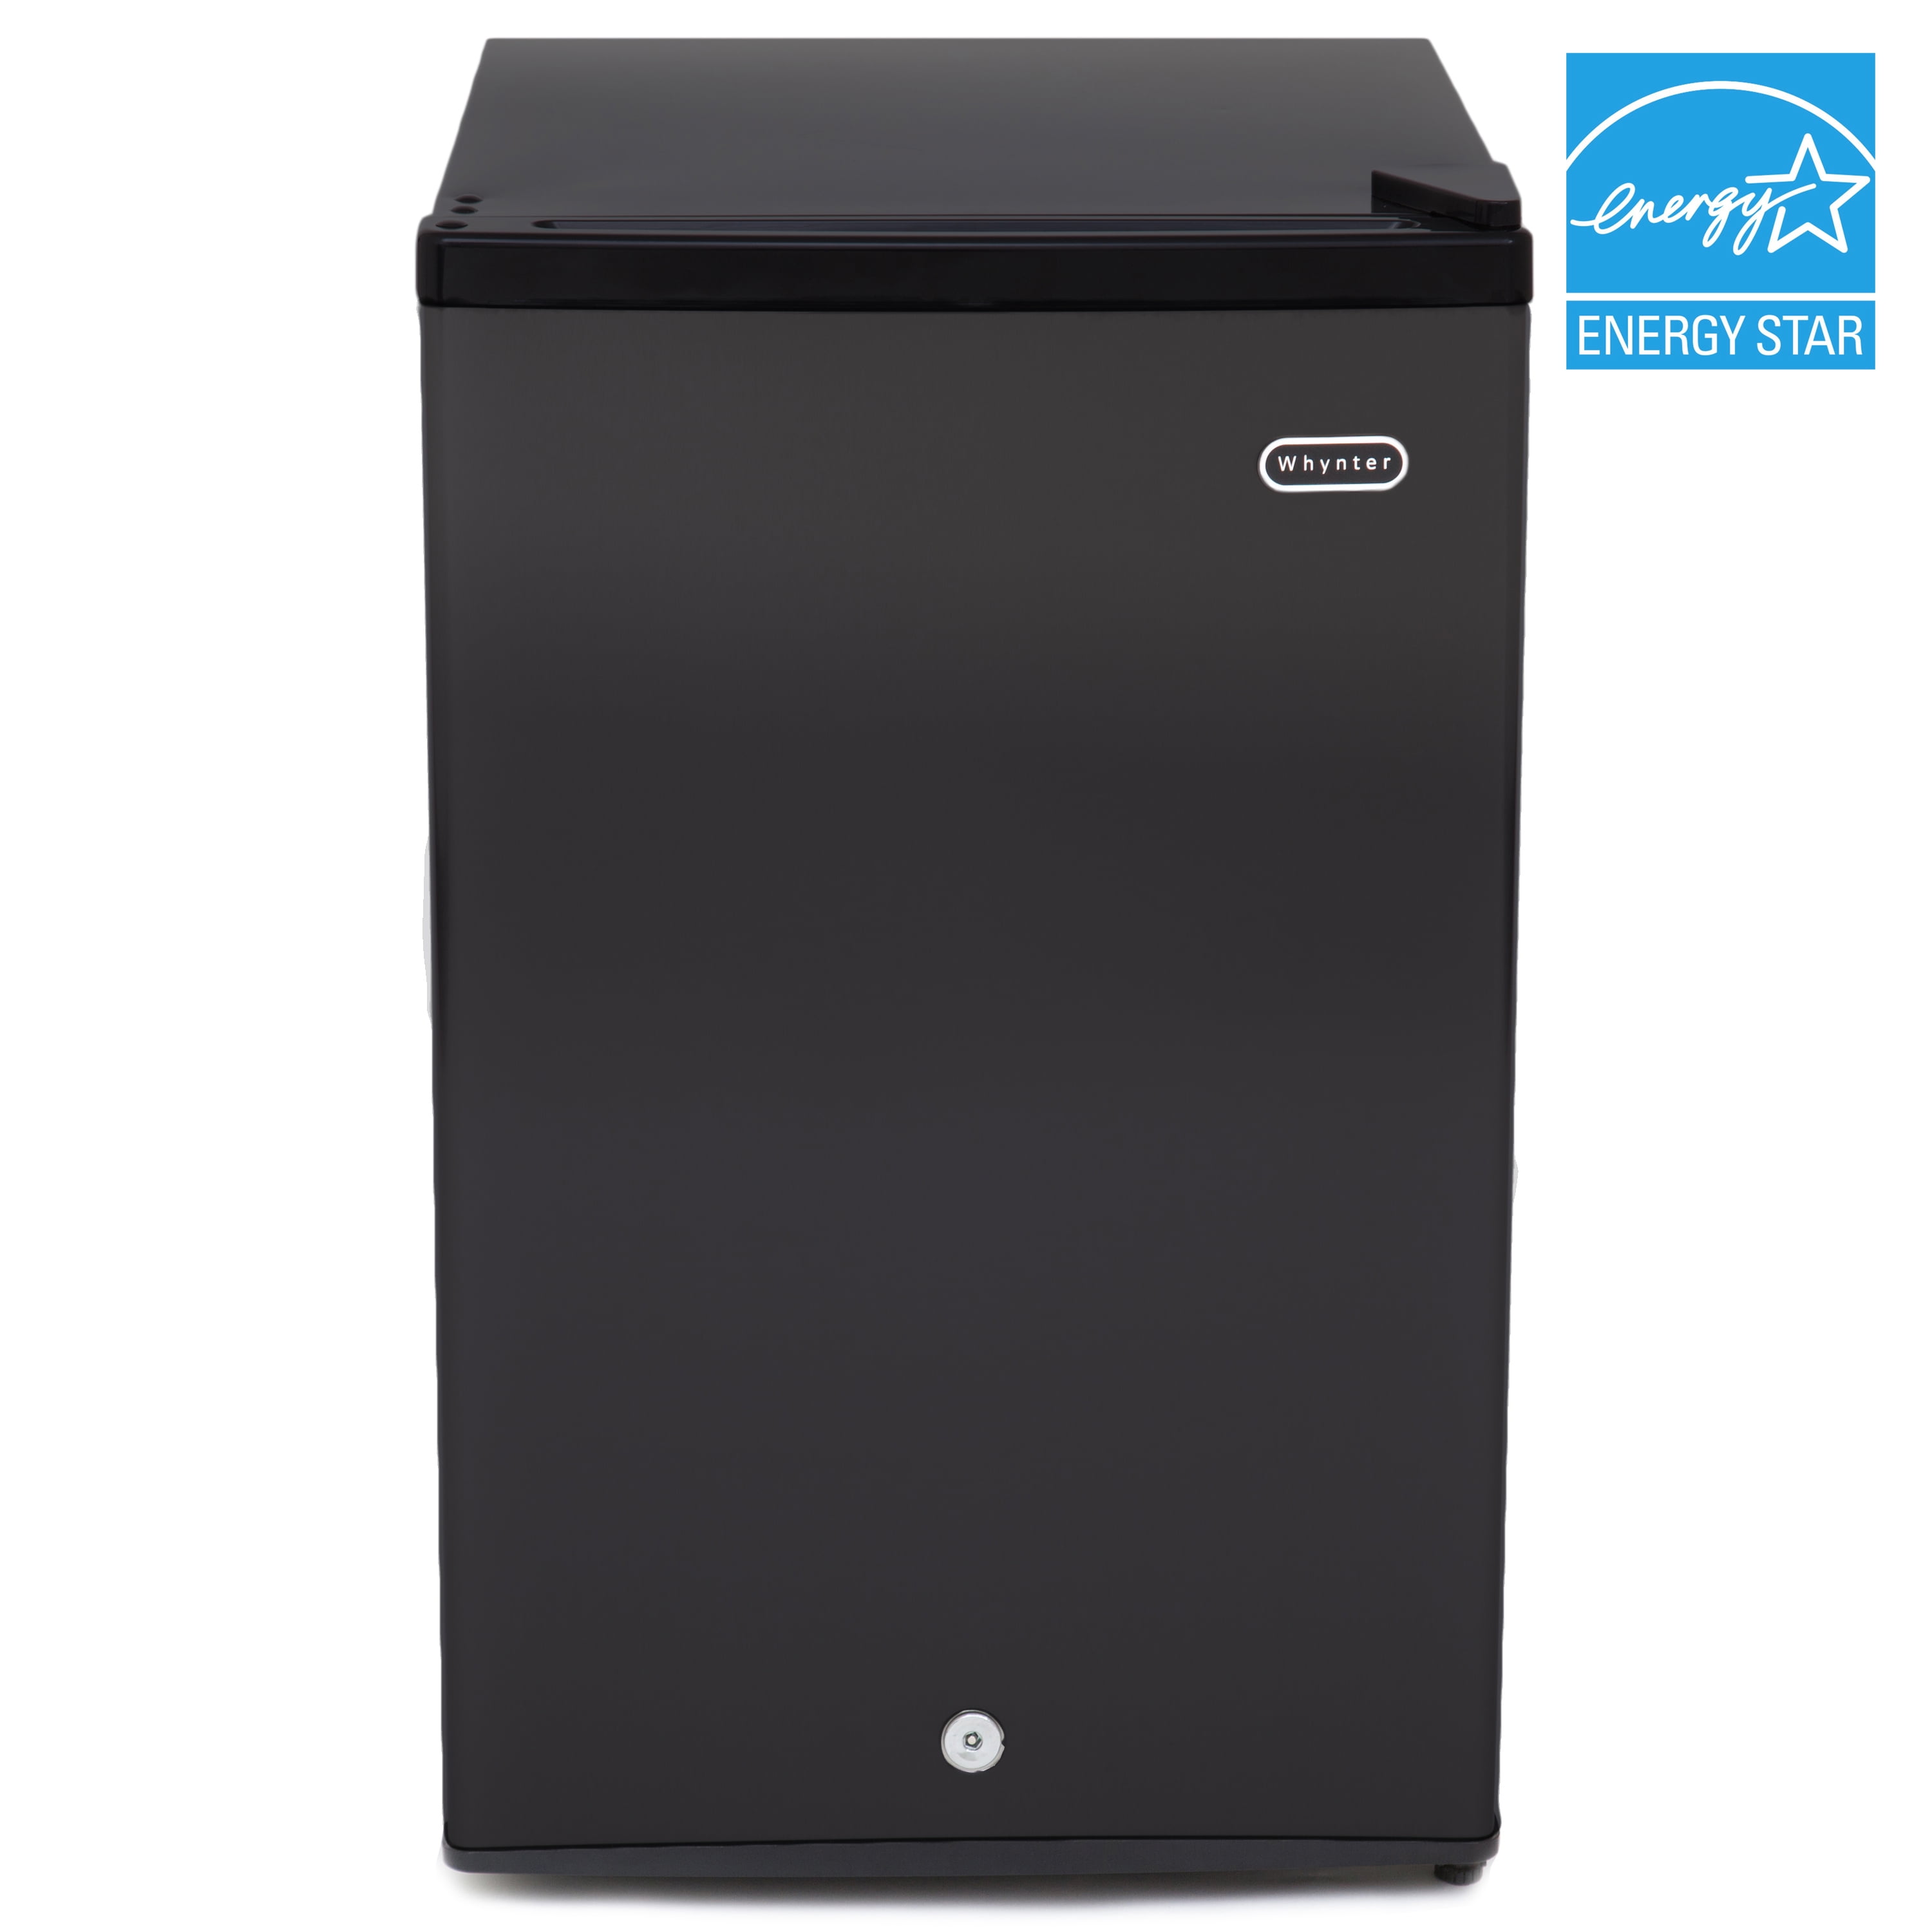 Photo 1 of (DENTED) Whynter 3.0 cu. ft. Energy Star Upright Freezer with Lock - Black